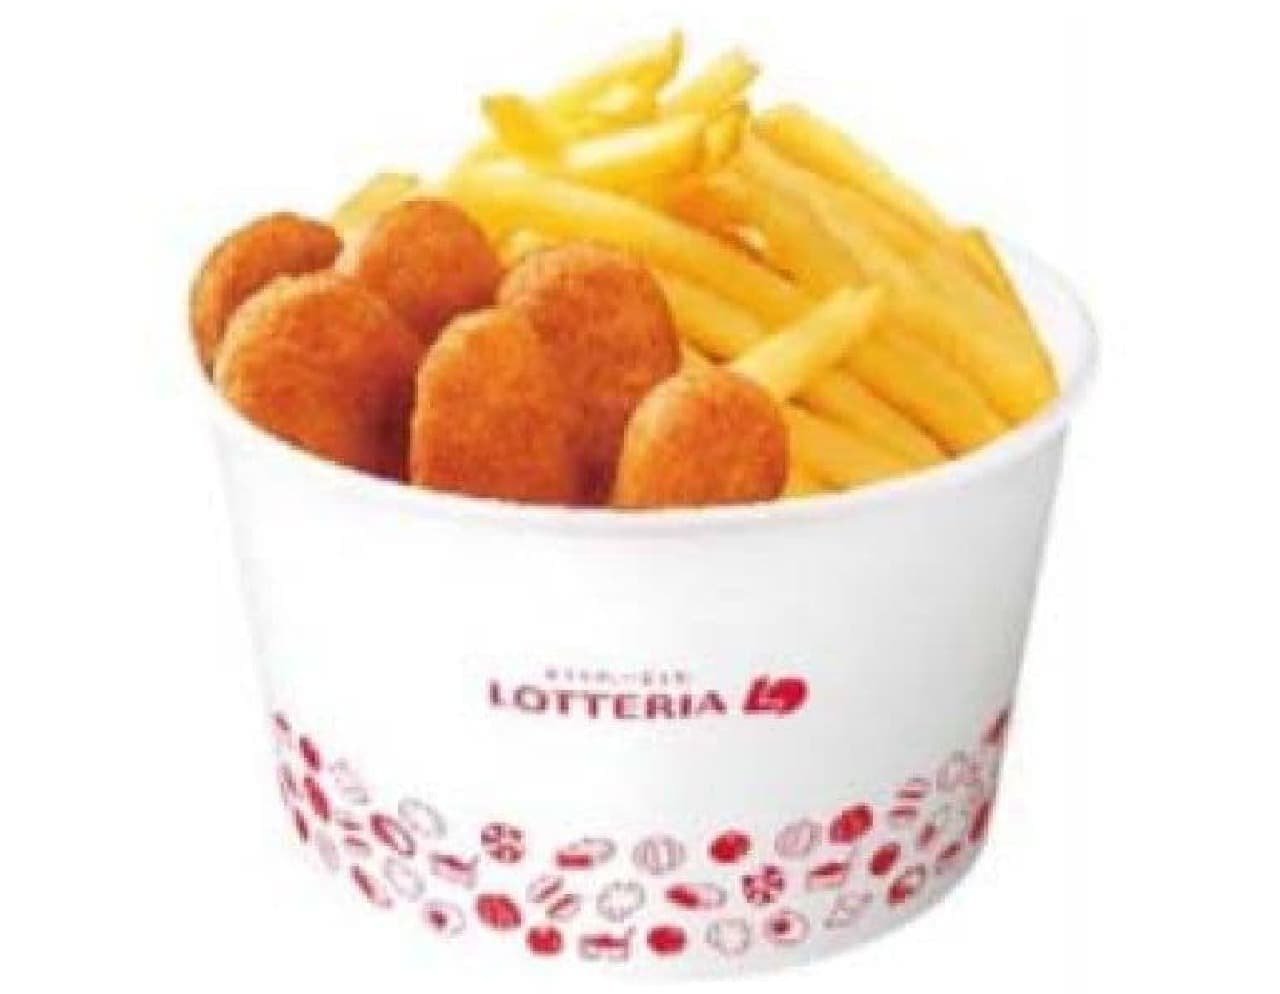 Lotteria "From Bucket Pote"